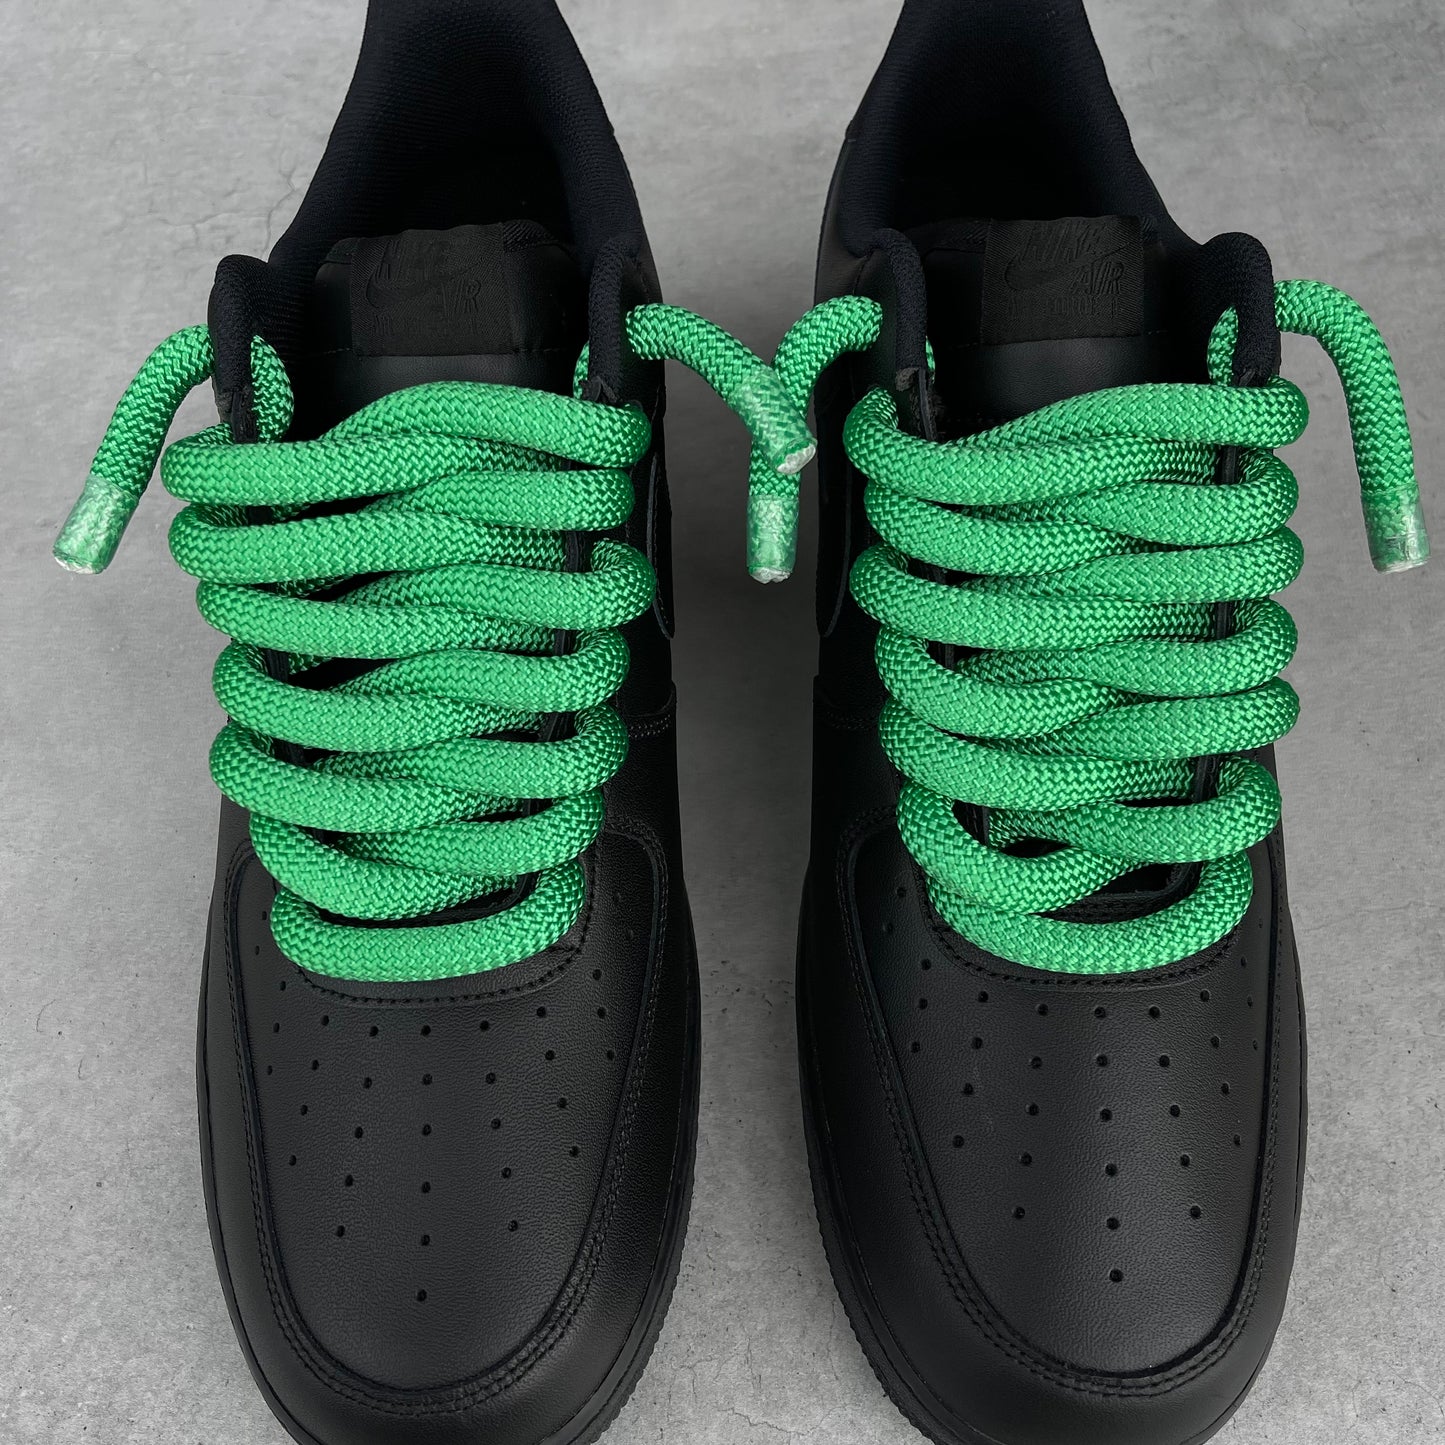 Custom AIR FORCE 1 black - Rope laces (green)